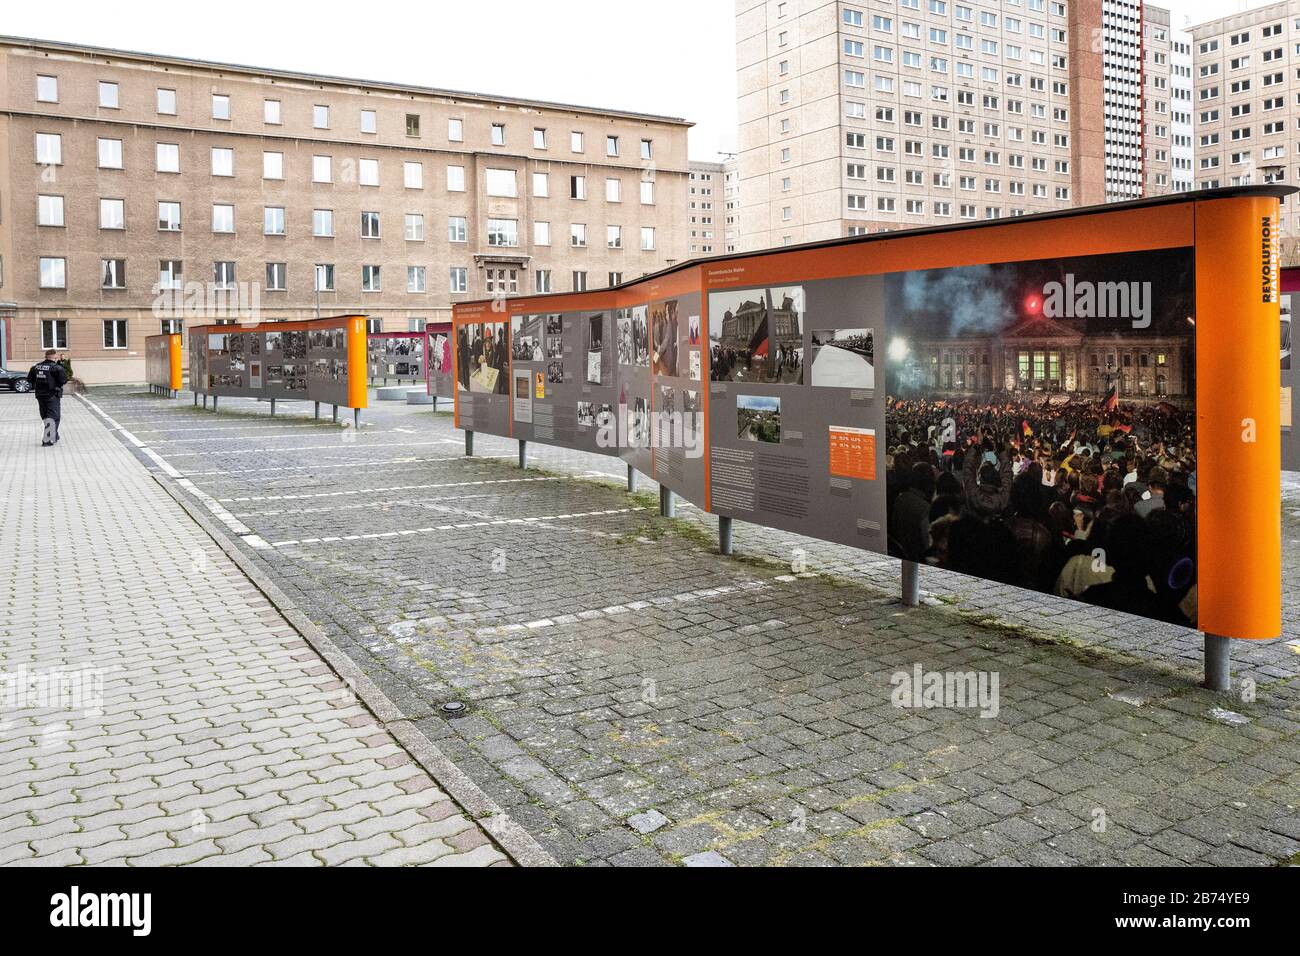 Germany, Berlin, 15.01.2020. The German President will visit the archives of the Stasi documentation authority on 15.01.2020 in Berlin. The permanent exhibition in the inner courtyard of the Stasi headquarters documents its most important stations in a place of peaceful revolution - from the beginnings of the protests to the fall of the Wall and German unification. [automated translation] Stock Photo